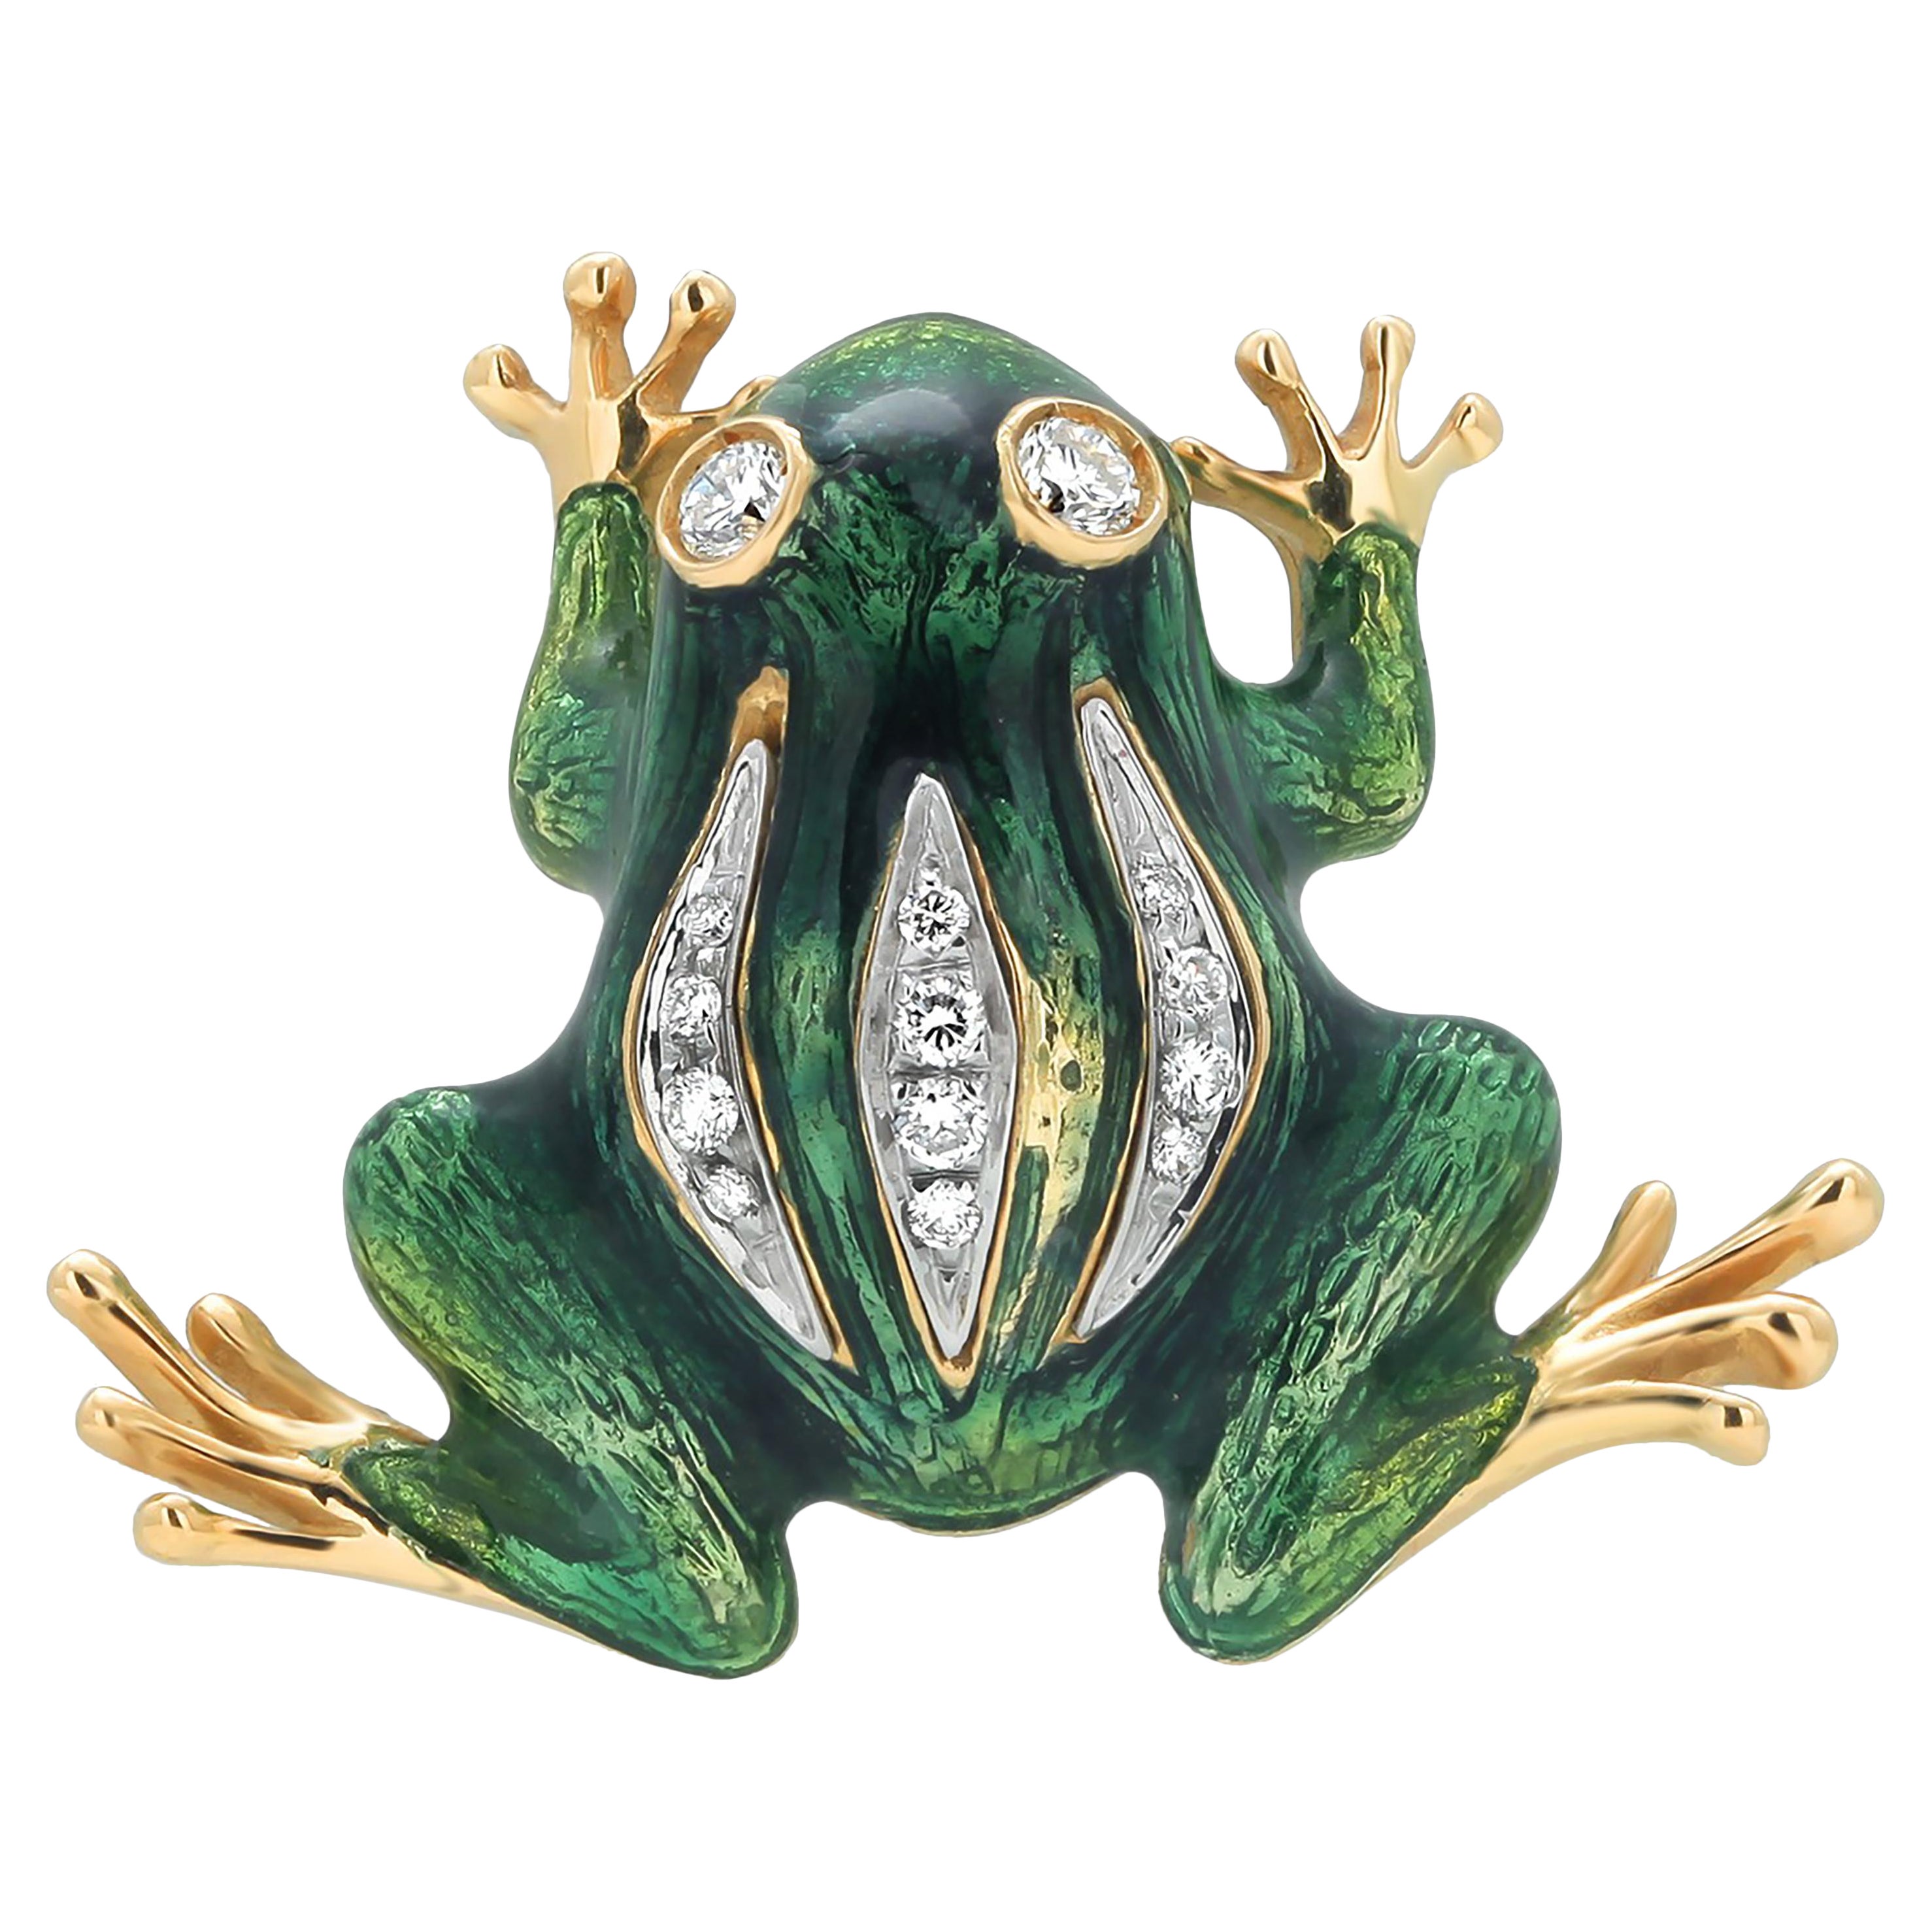 The vintage frog brooch signed Garavelli is a charming and exquisite piece of jewelry. Crafted with great attention to detail, this brooch showcases the skill and artistry of the renowned Garavelli brand.
Stamped verso, 